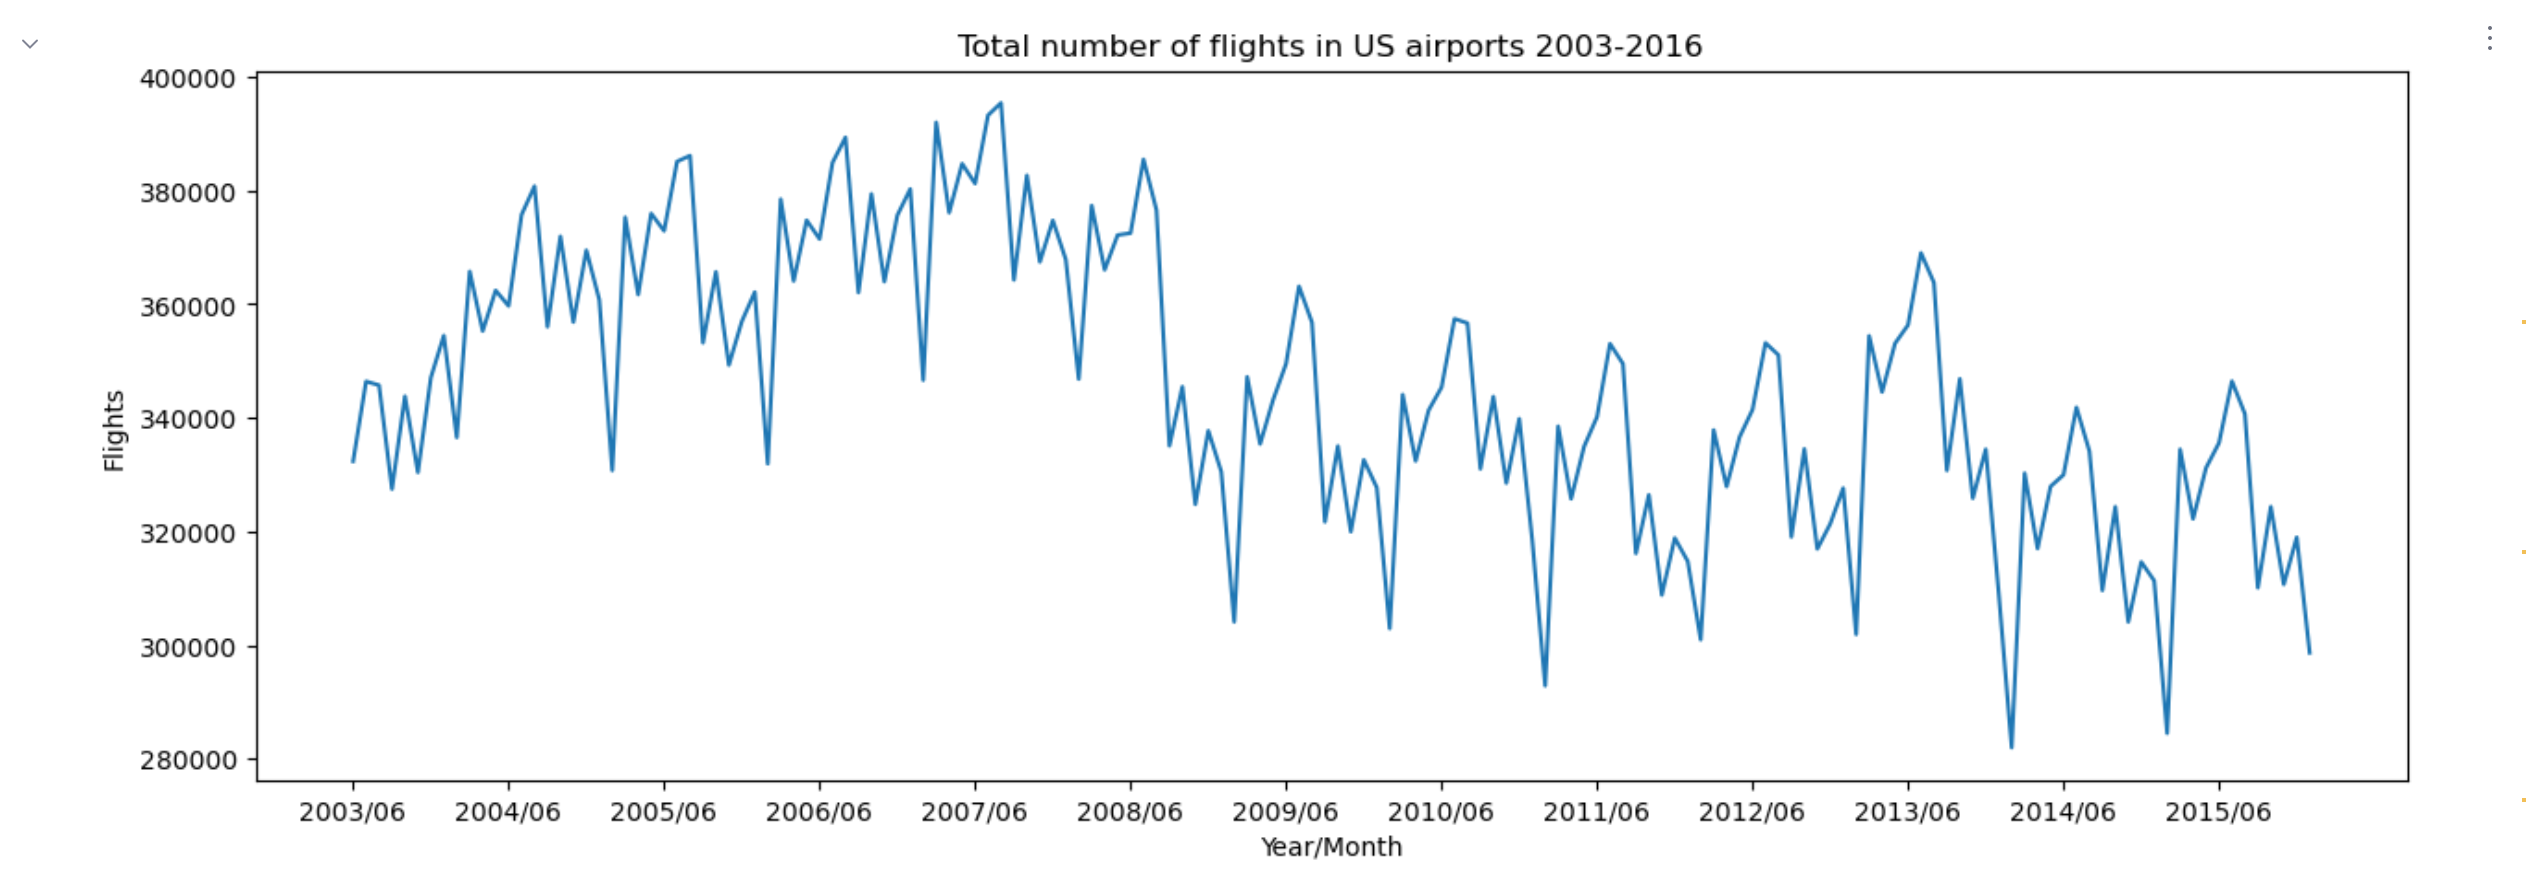 Total number of flights in US airports 2003-2016